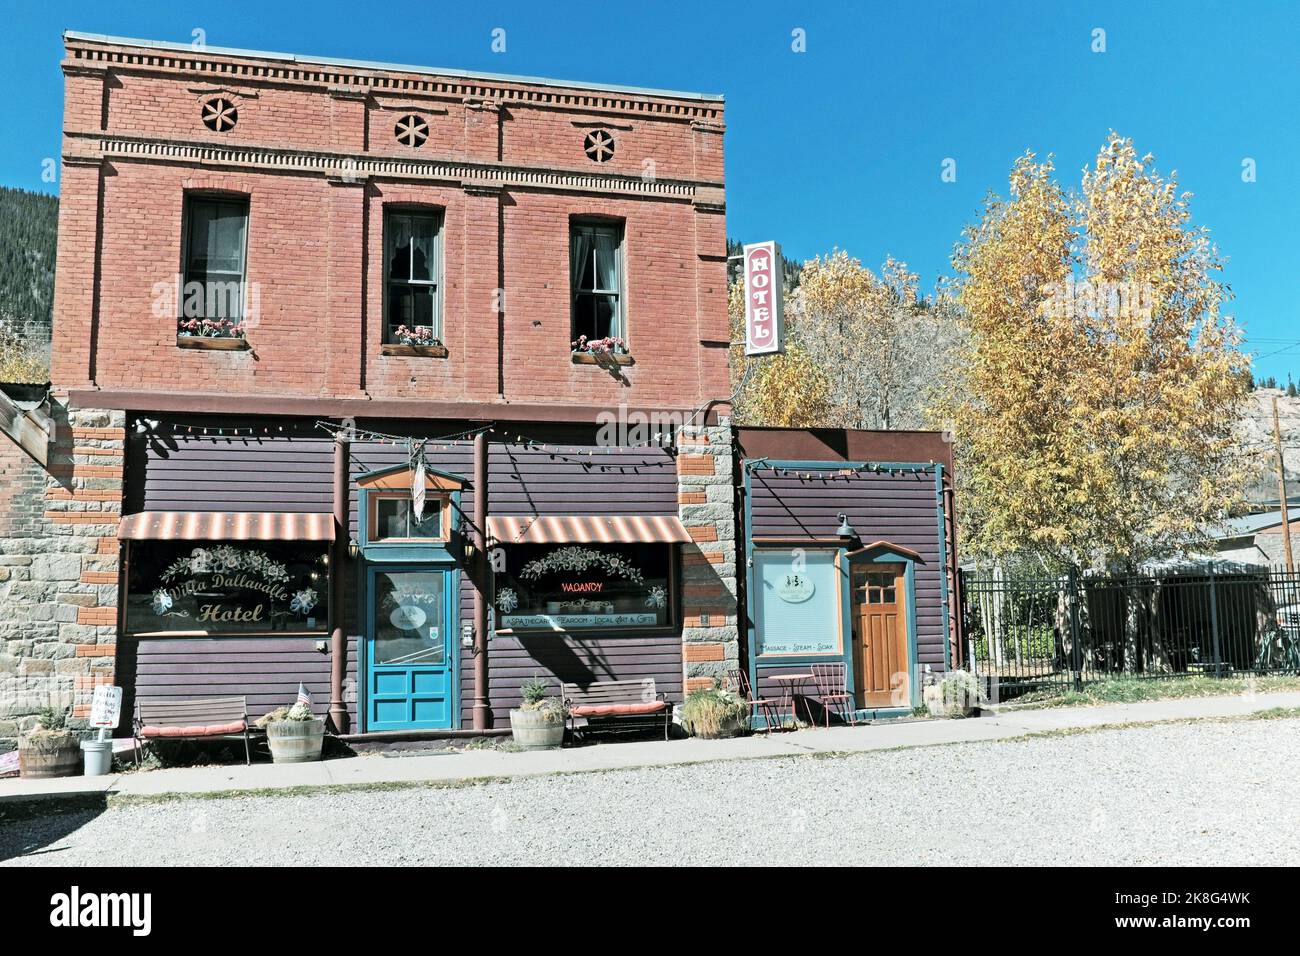 Villa Dallavalle Historic Inn and Hotel on Blair Street in Silverton, Colorado, USA was a miner boarding house, a grocery store, and bed and breakfast. Stock Photo